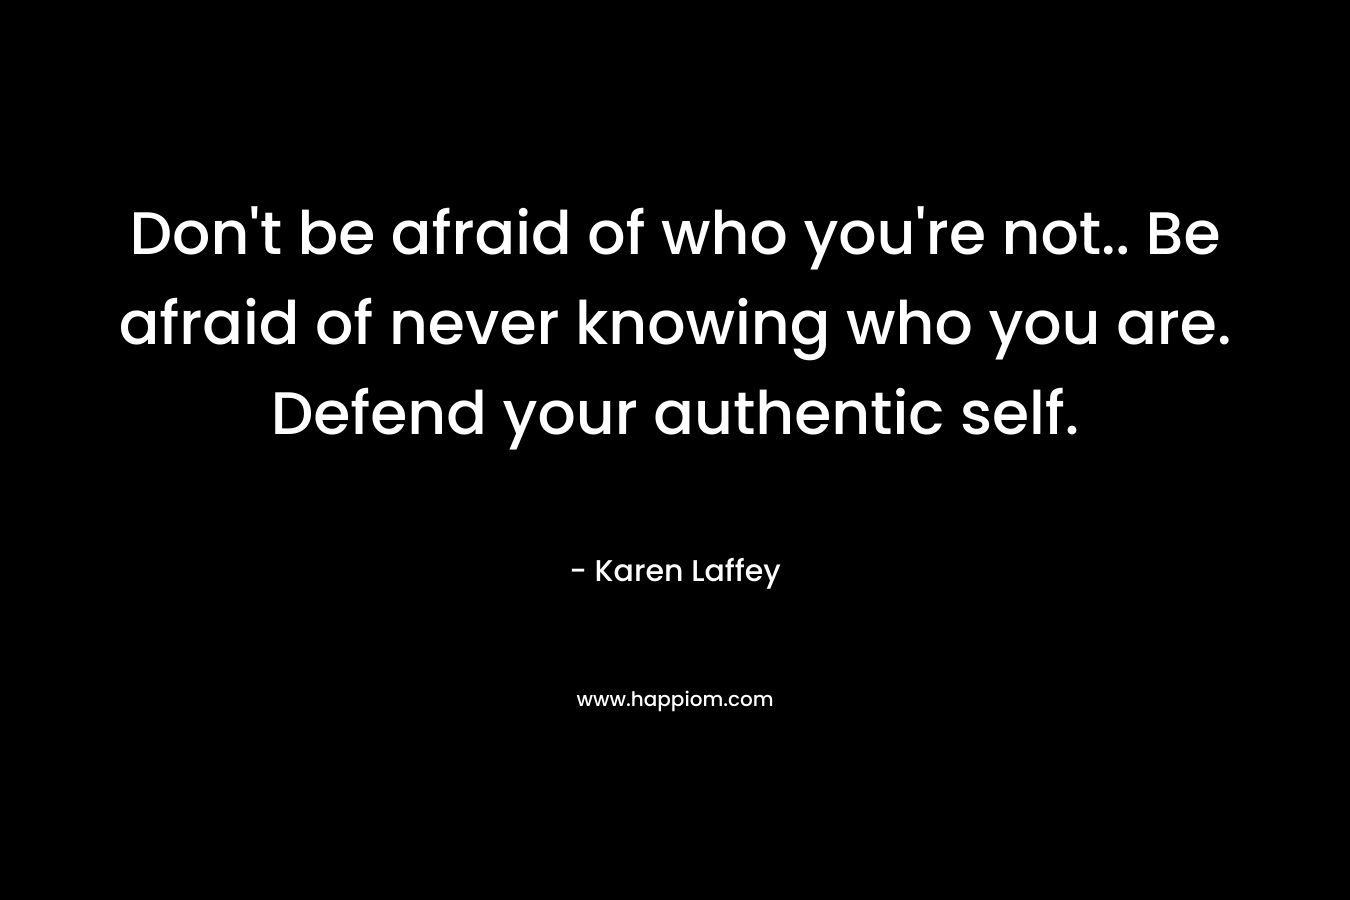 Don't be afraid of who you're not.. Be afraid of never knowing who you are. Defend your authentic self.